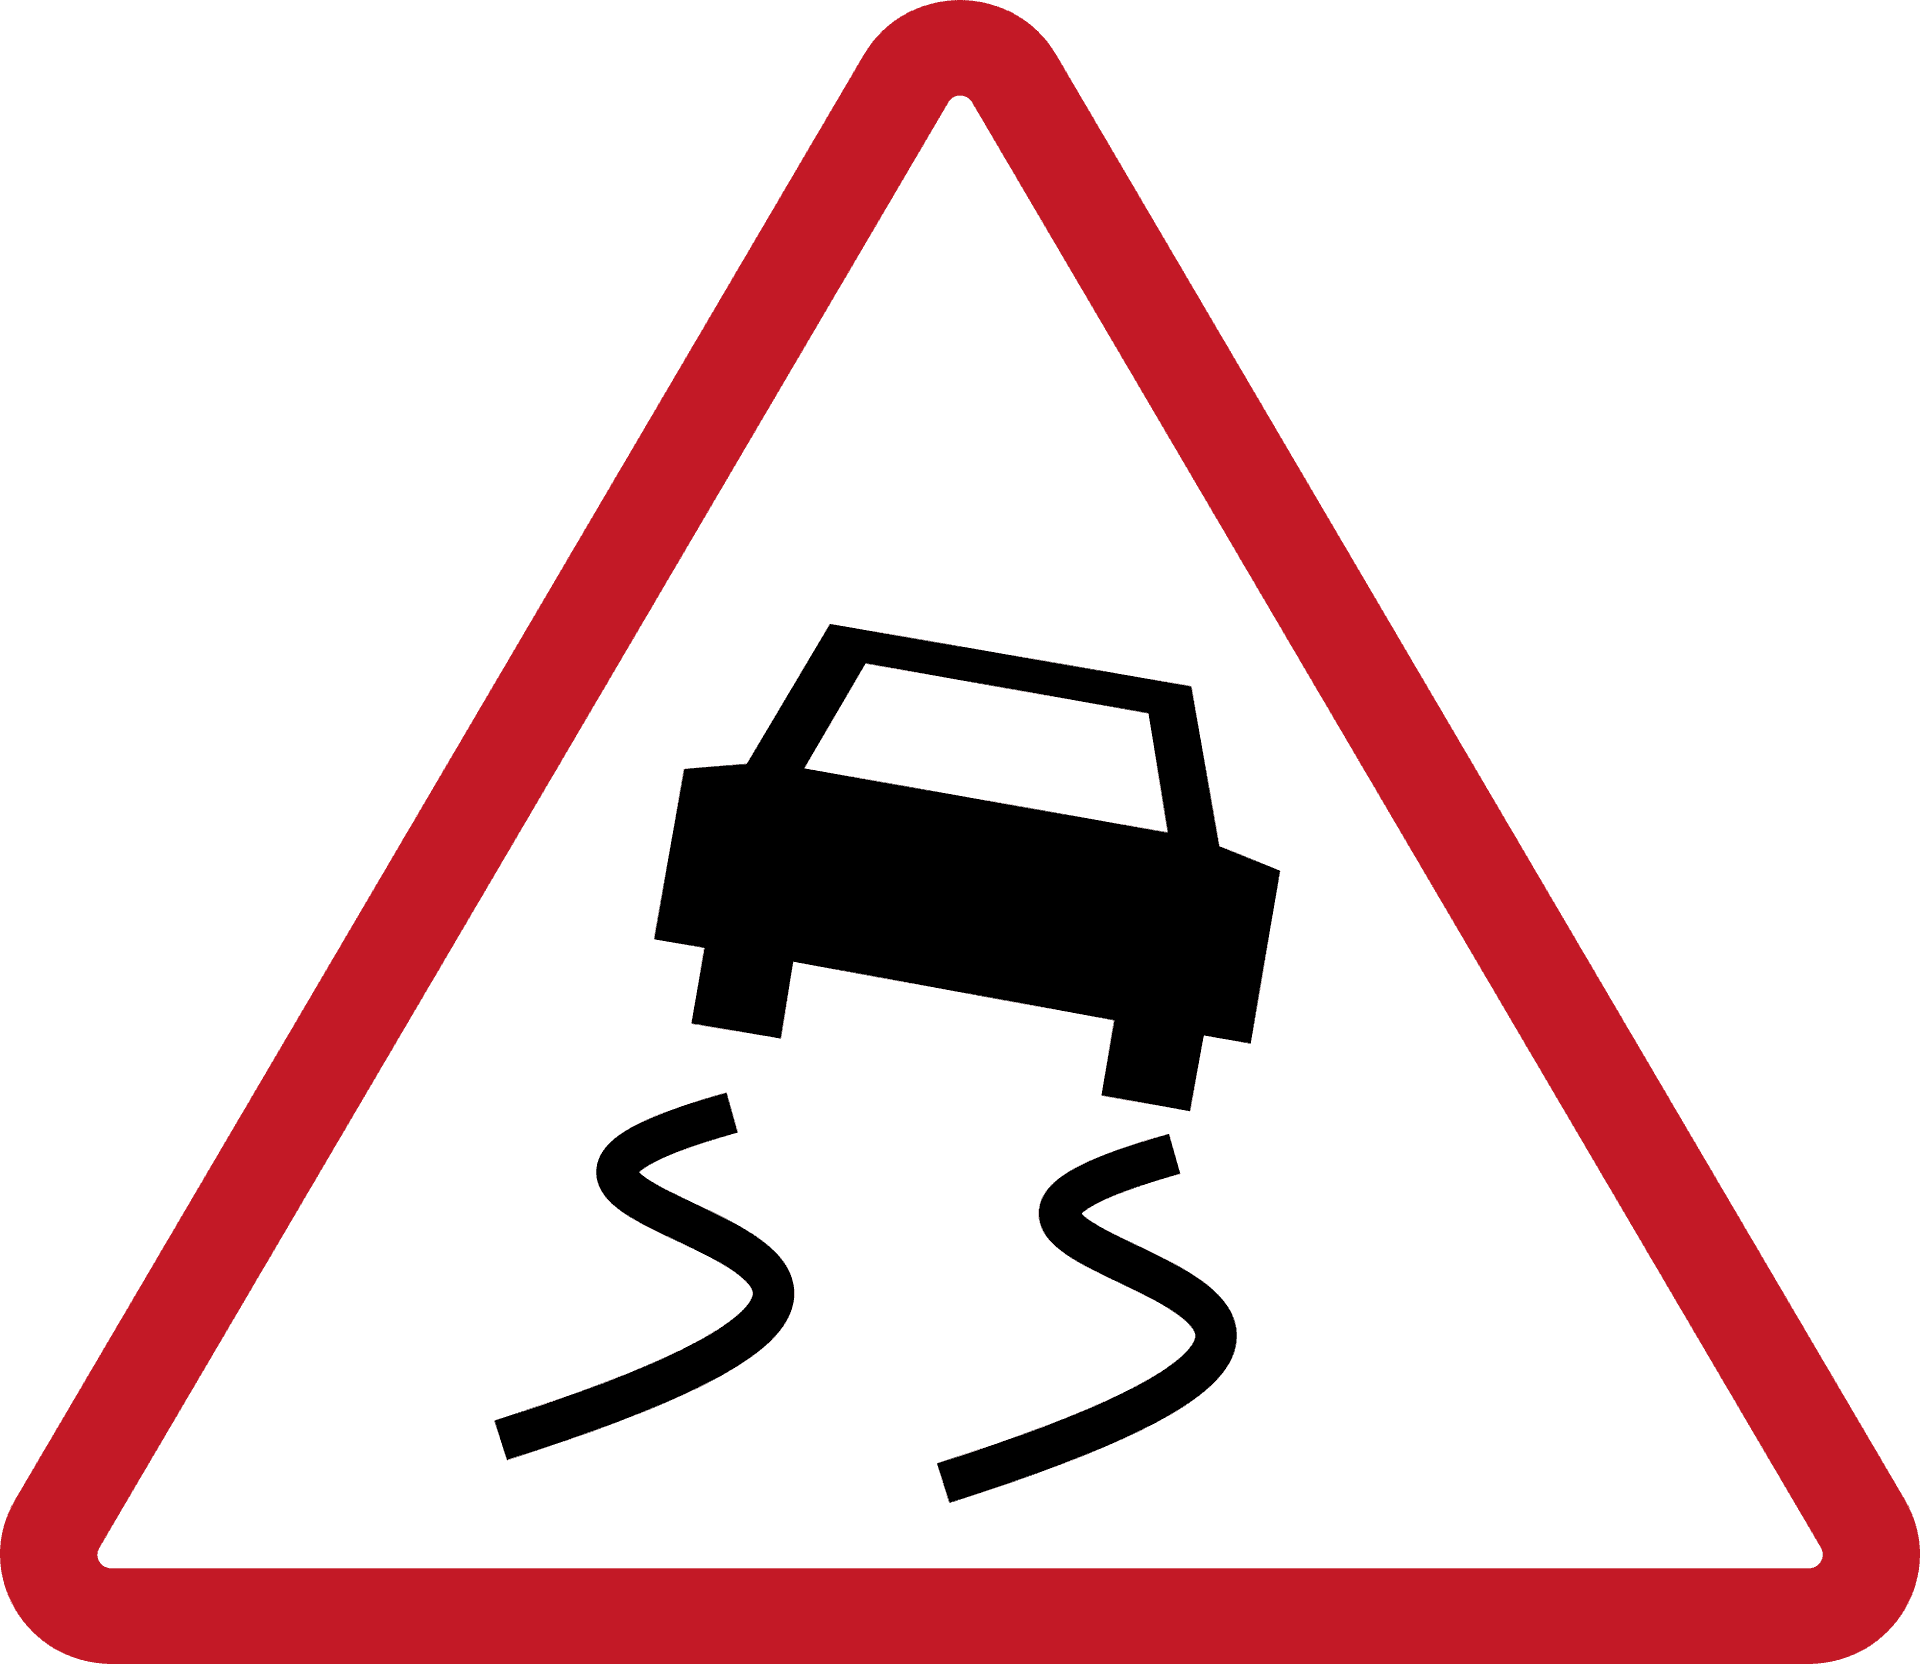 Slippery_ Road_ Warning_ Sign PNG